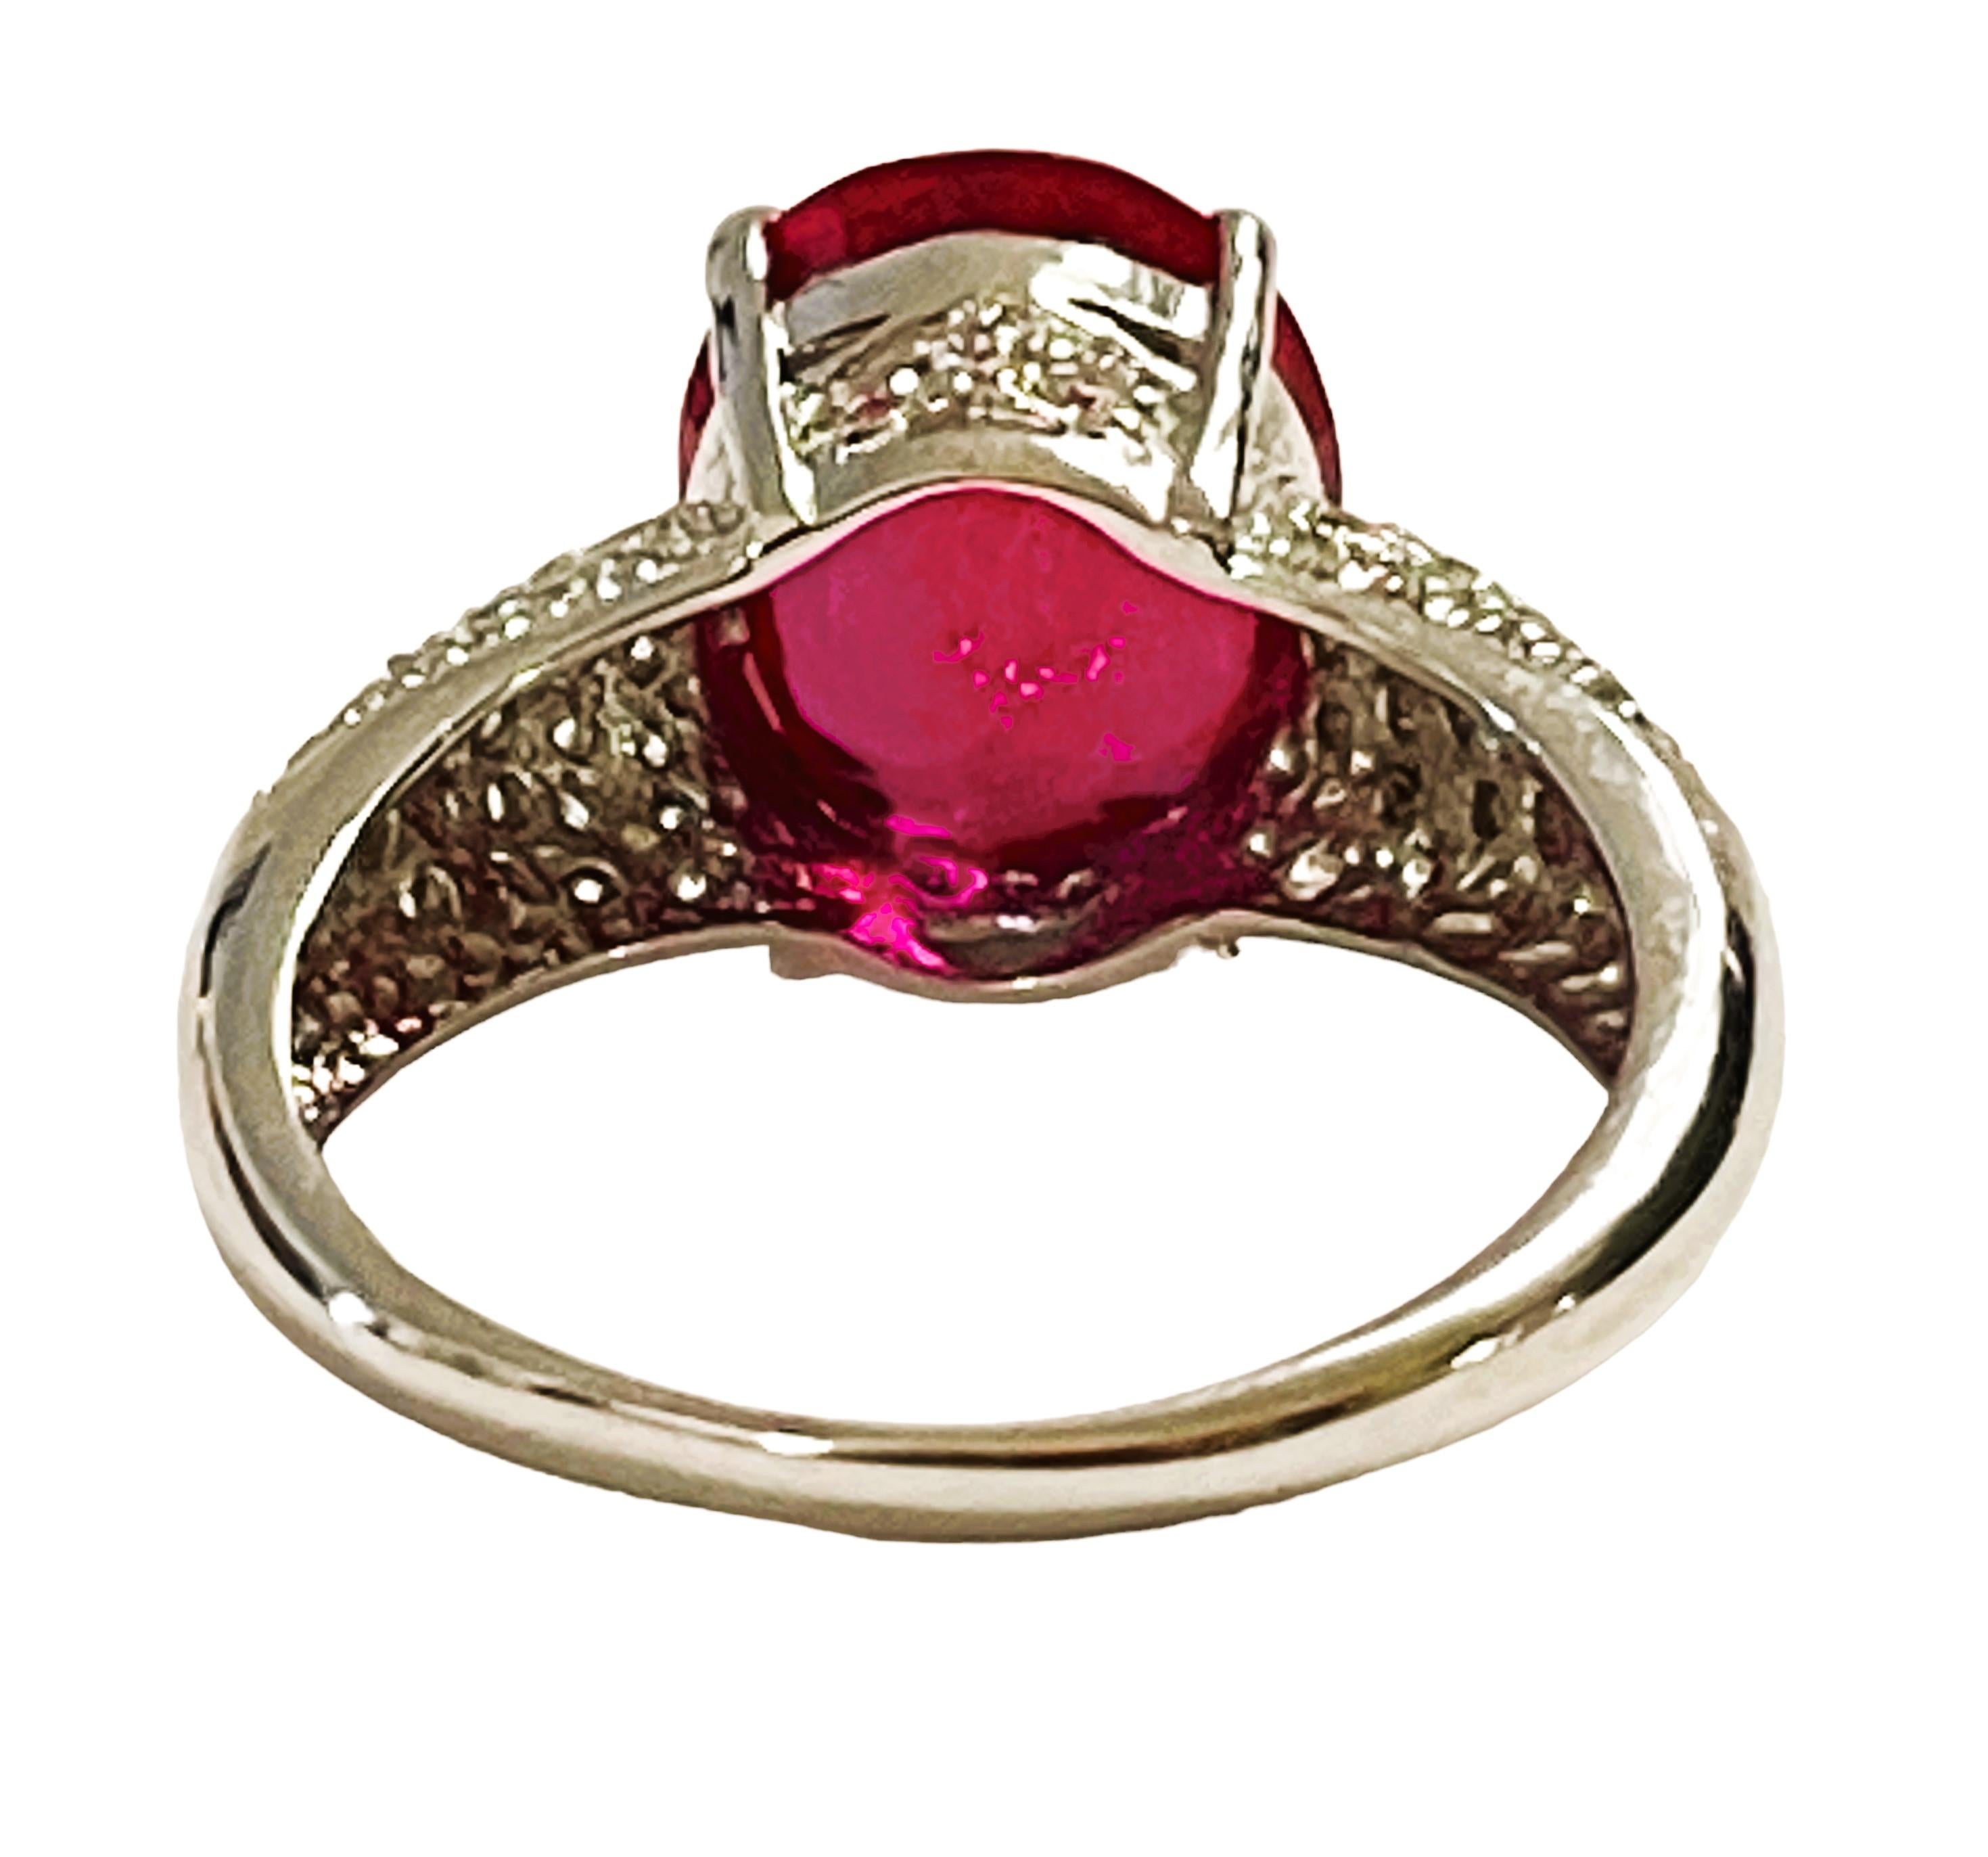 Oval Cut New Madagascar 5.2ct Pinkish Red Sapphire & White Sapphire Sterling Ring